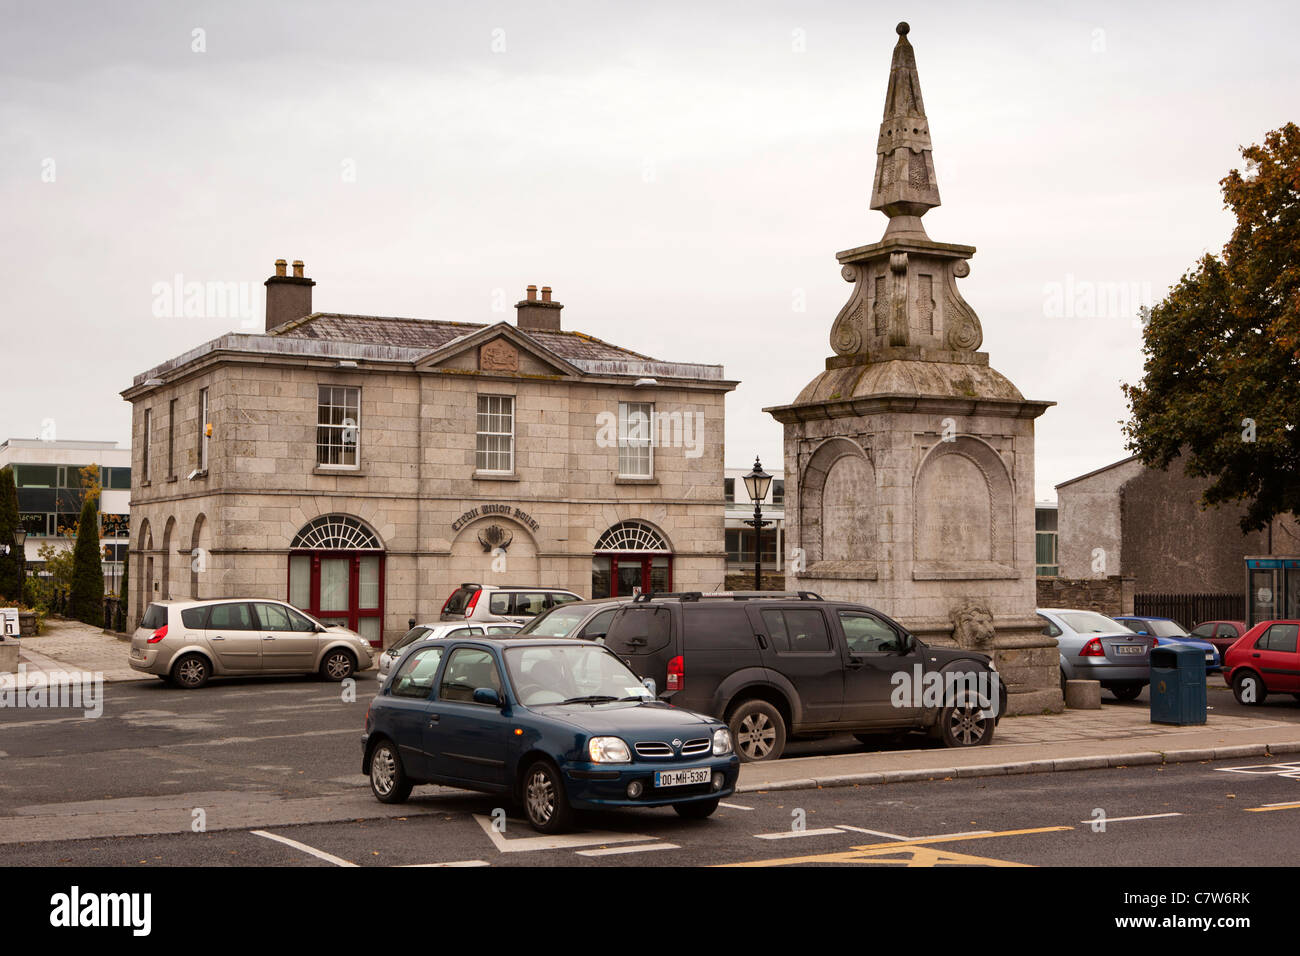 Ireland, Co Wicklow, Blessington Downshire coming of age monument outside Credit Union House Stock Photo